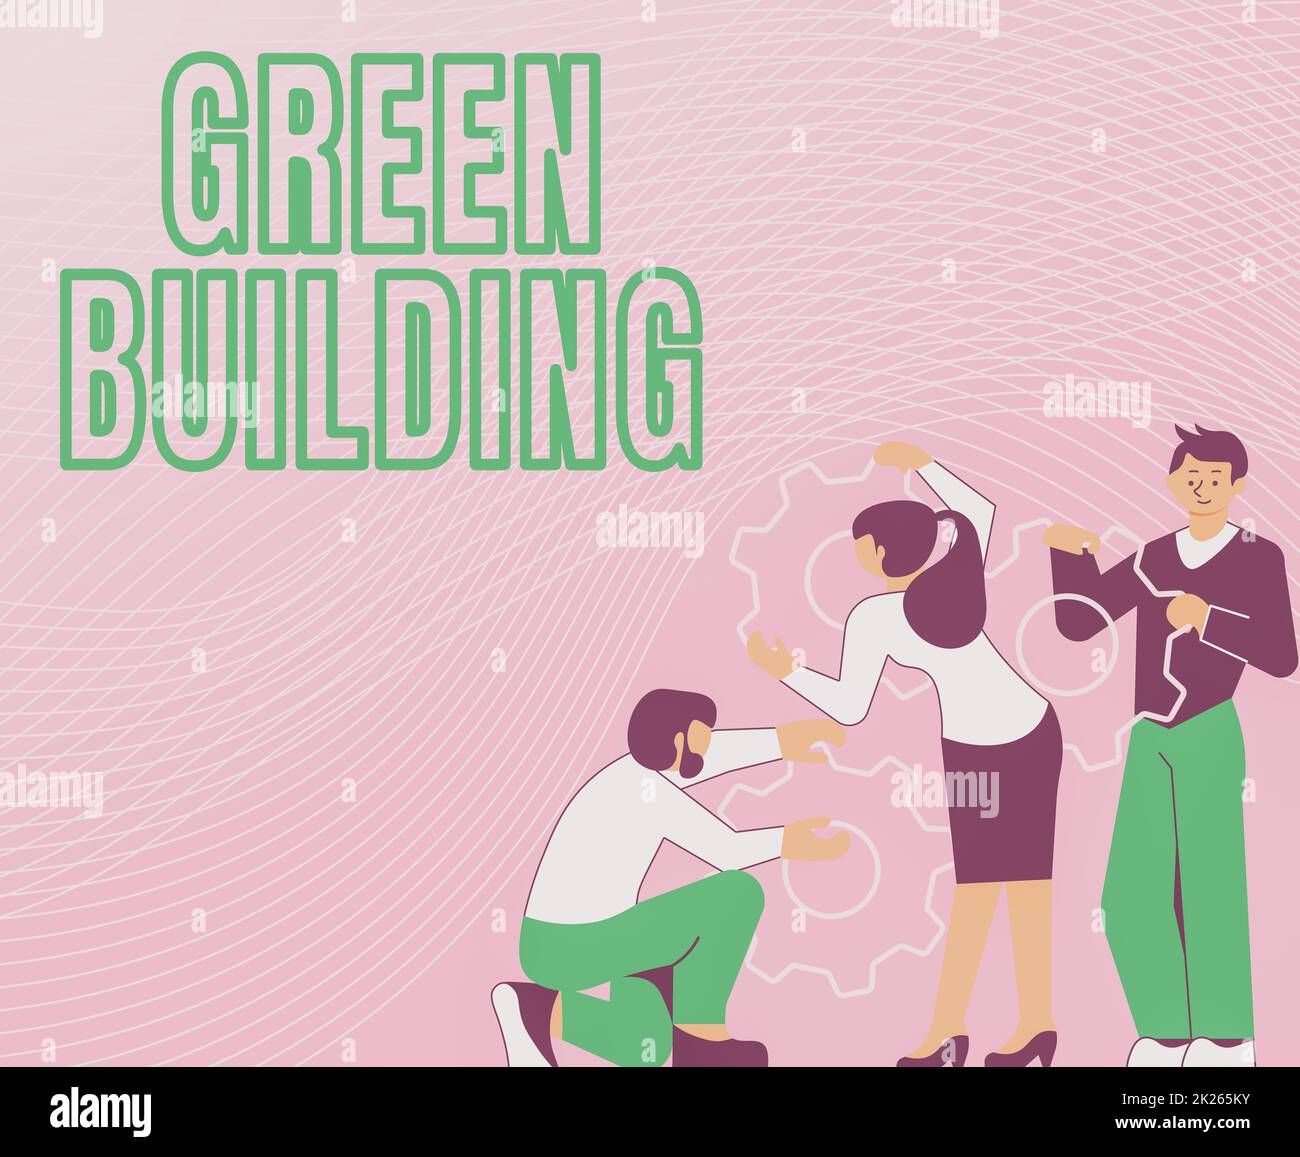 Conceptual display Green Building. Business approach A structure that is environmentally responsible Sustainable Illustration Of A Group Holding Spur Gear Helping Each For Their Work. Stock Photo